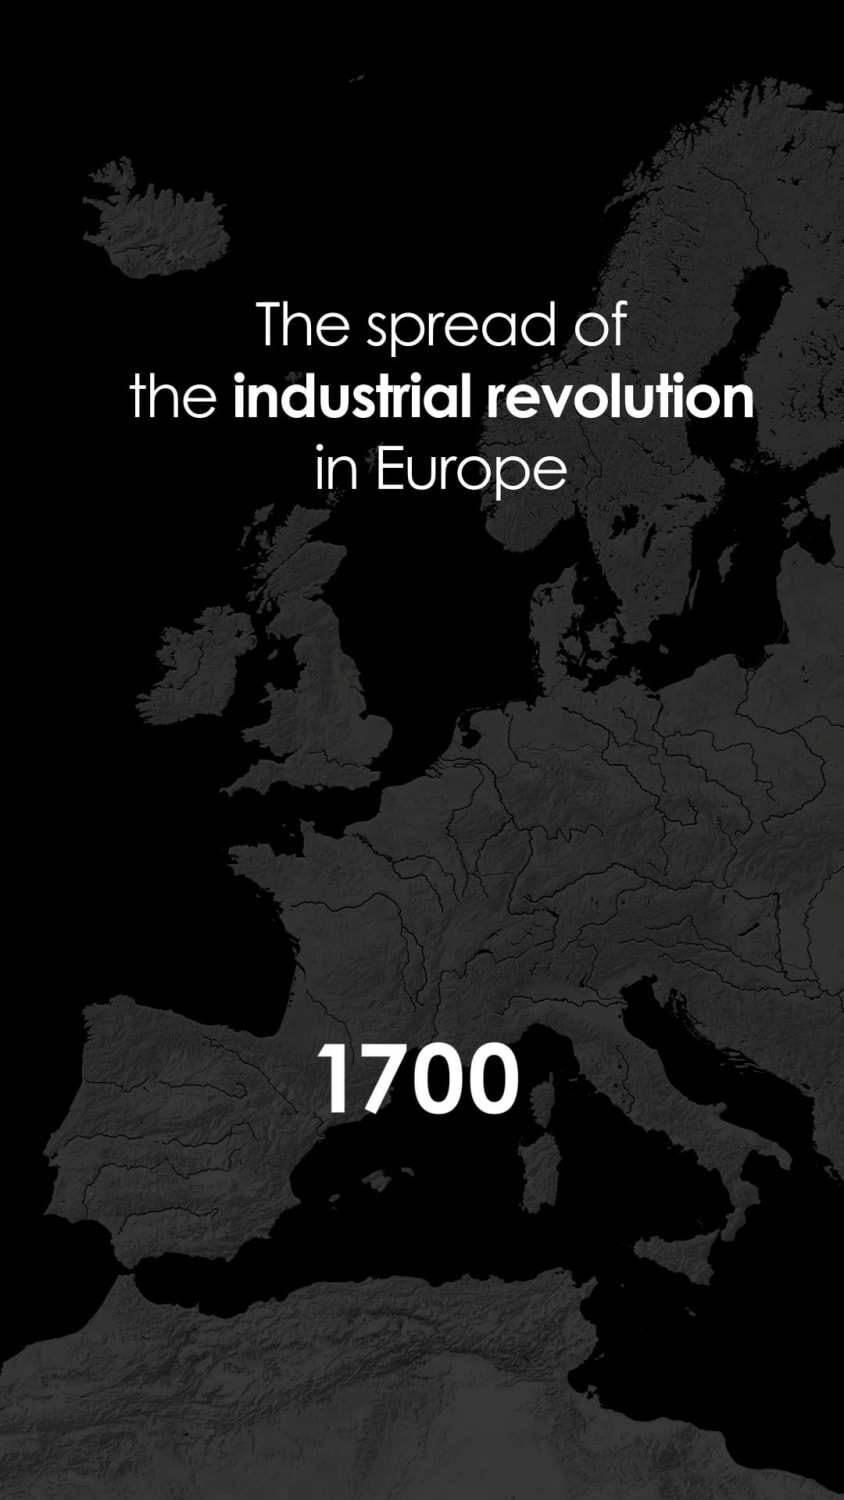 Spread of the industrial revolution in Europe